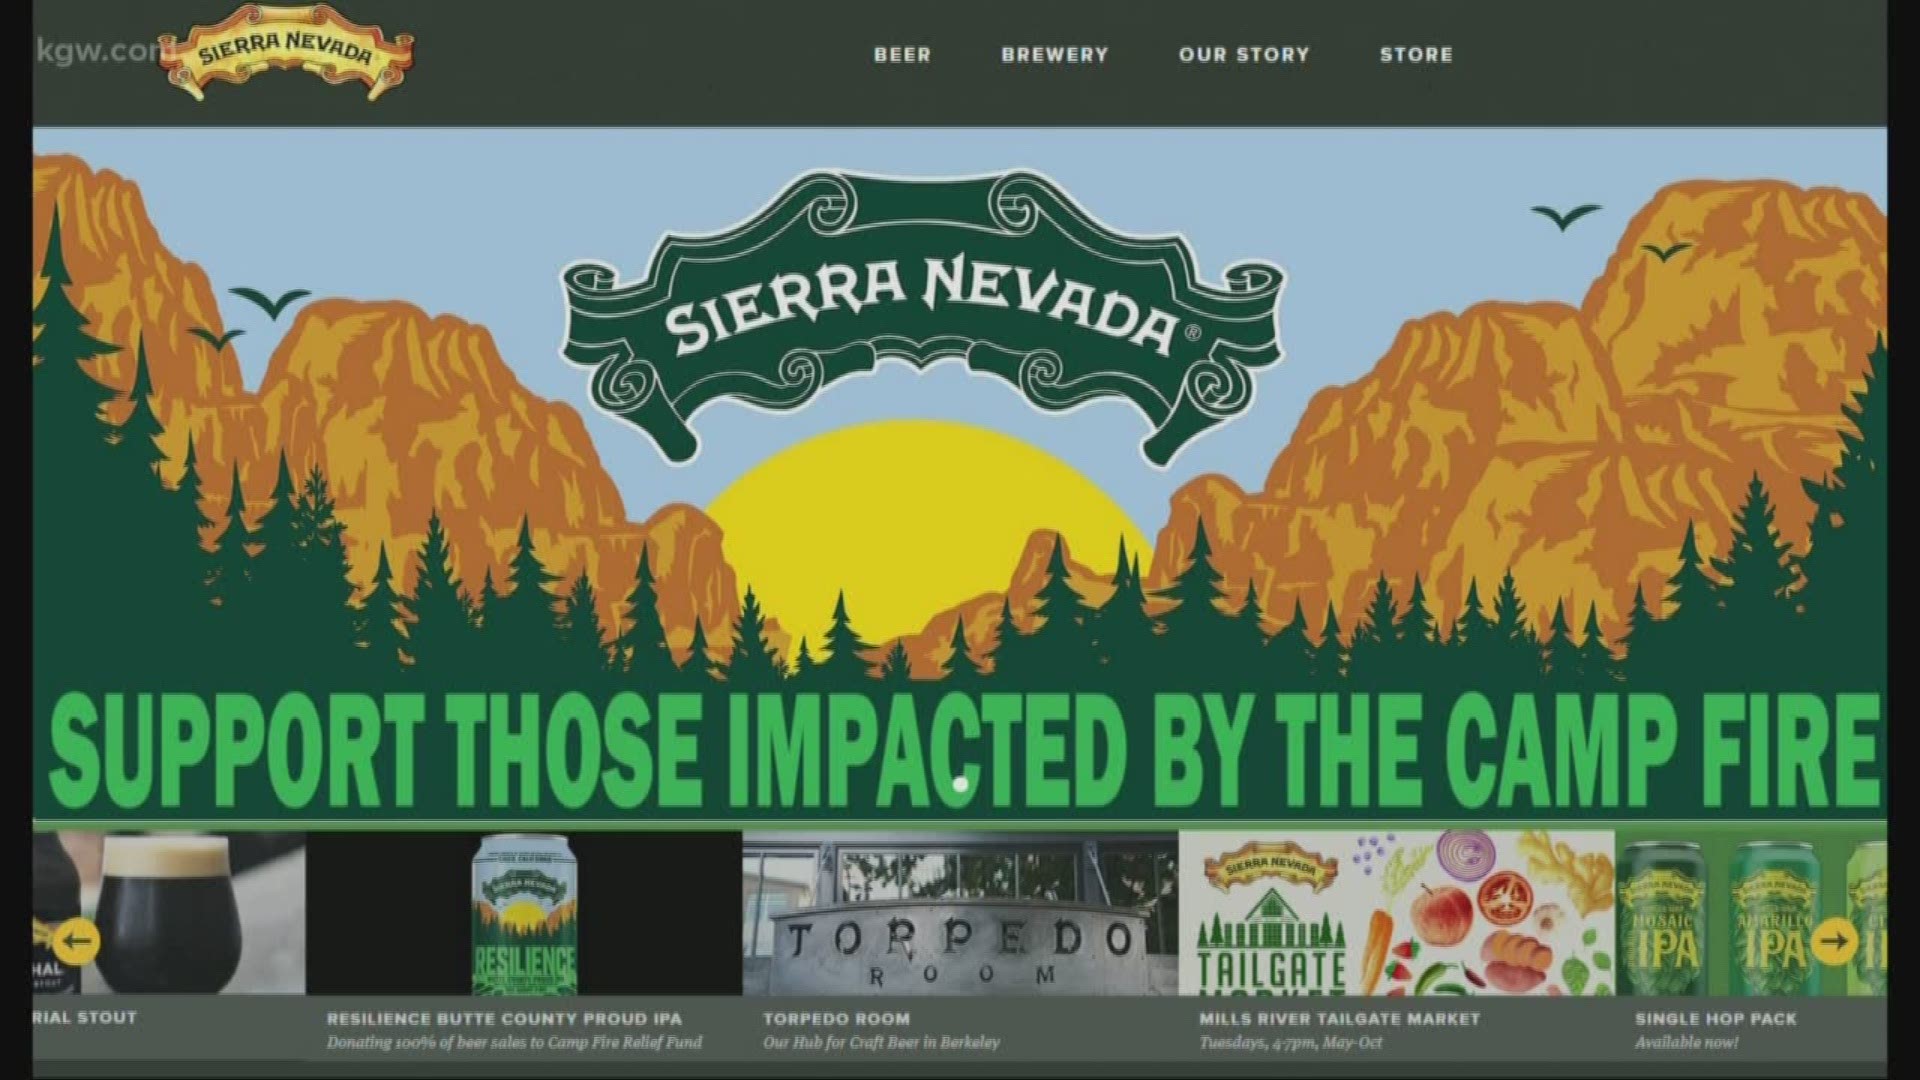 Local breweries come together to raise money to help victims of the Camp Fire.